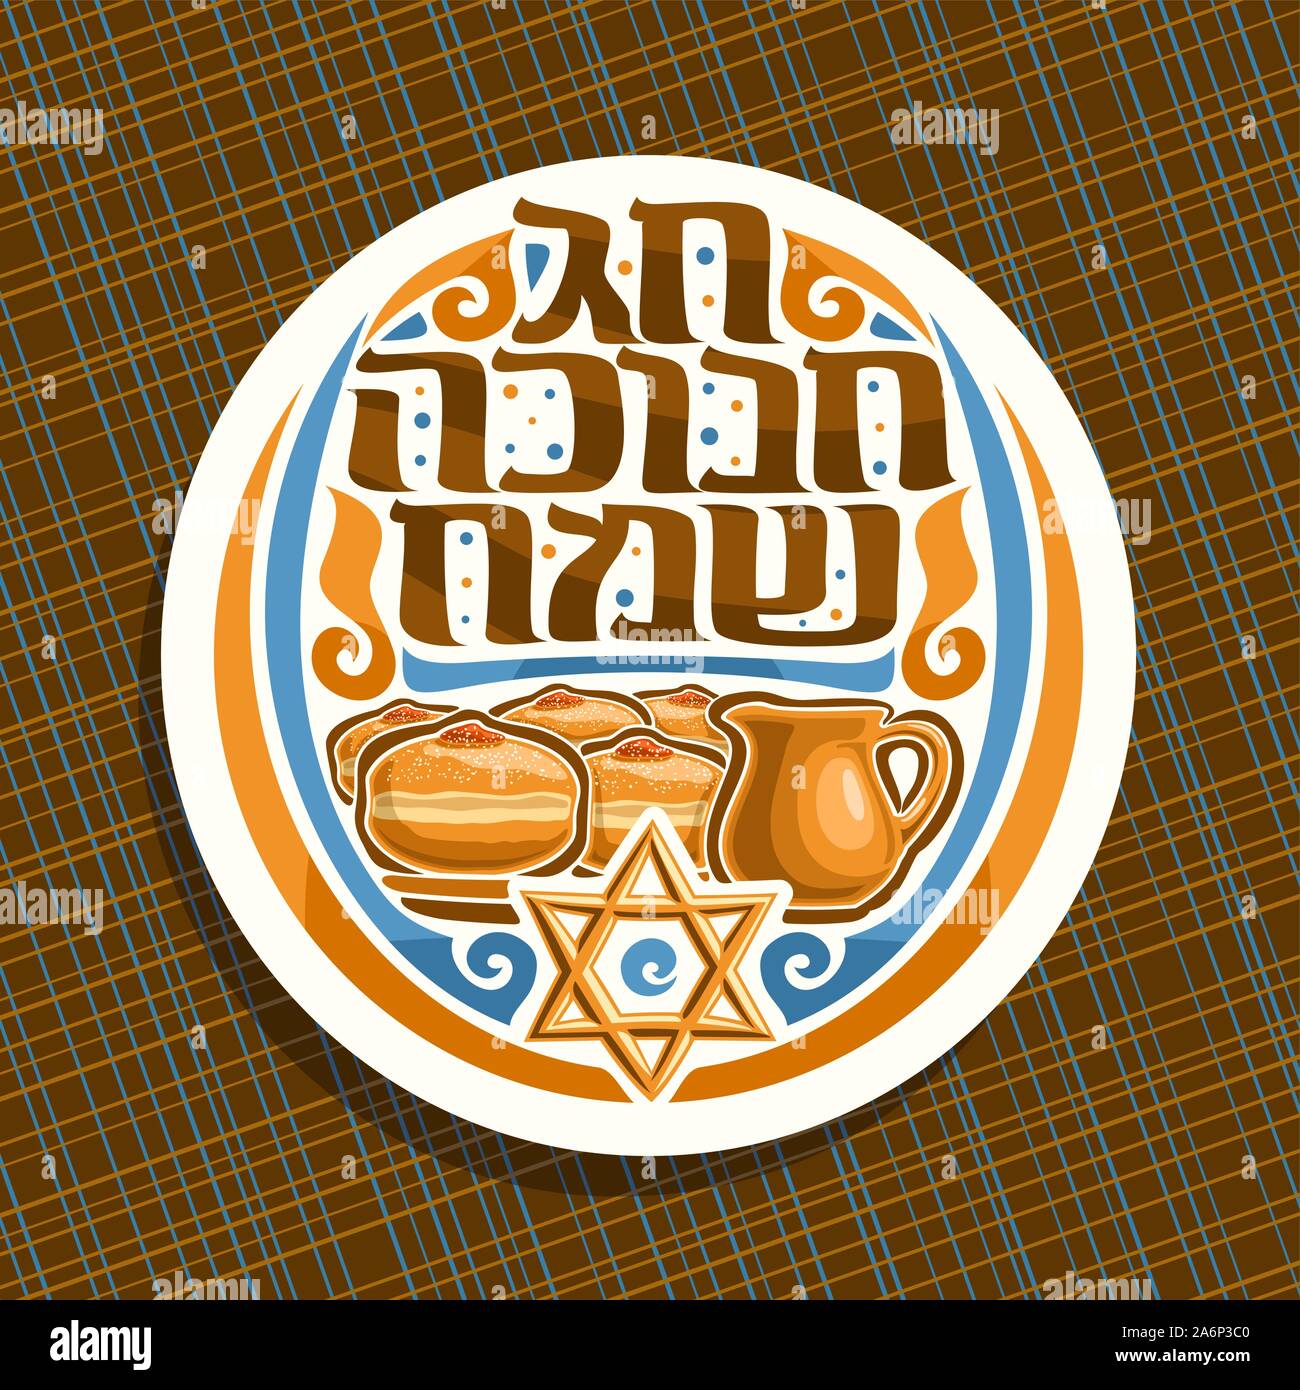 Vector logo for Hanukkah, white round sign with original typeface on hebrew language - happy hanukkah, traditional jewish sweets sufganiyot with jam, Stock Vector